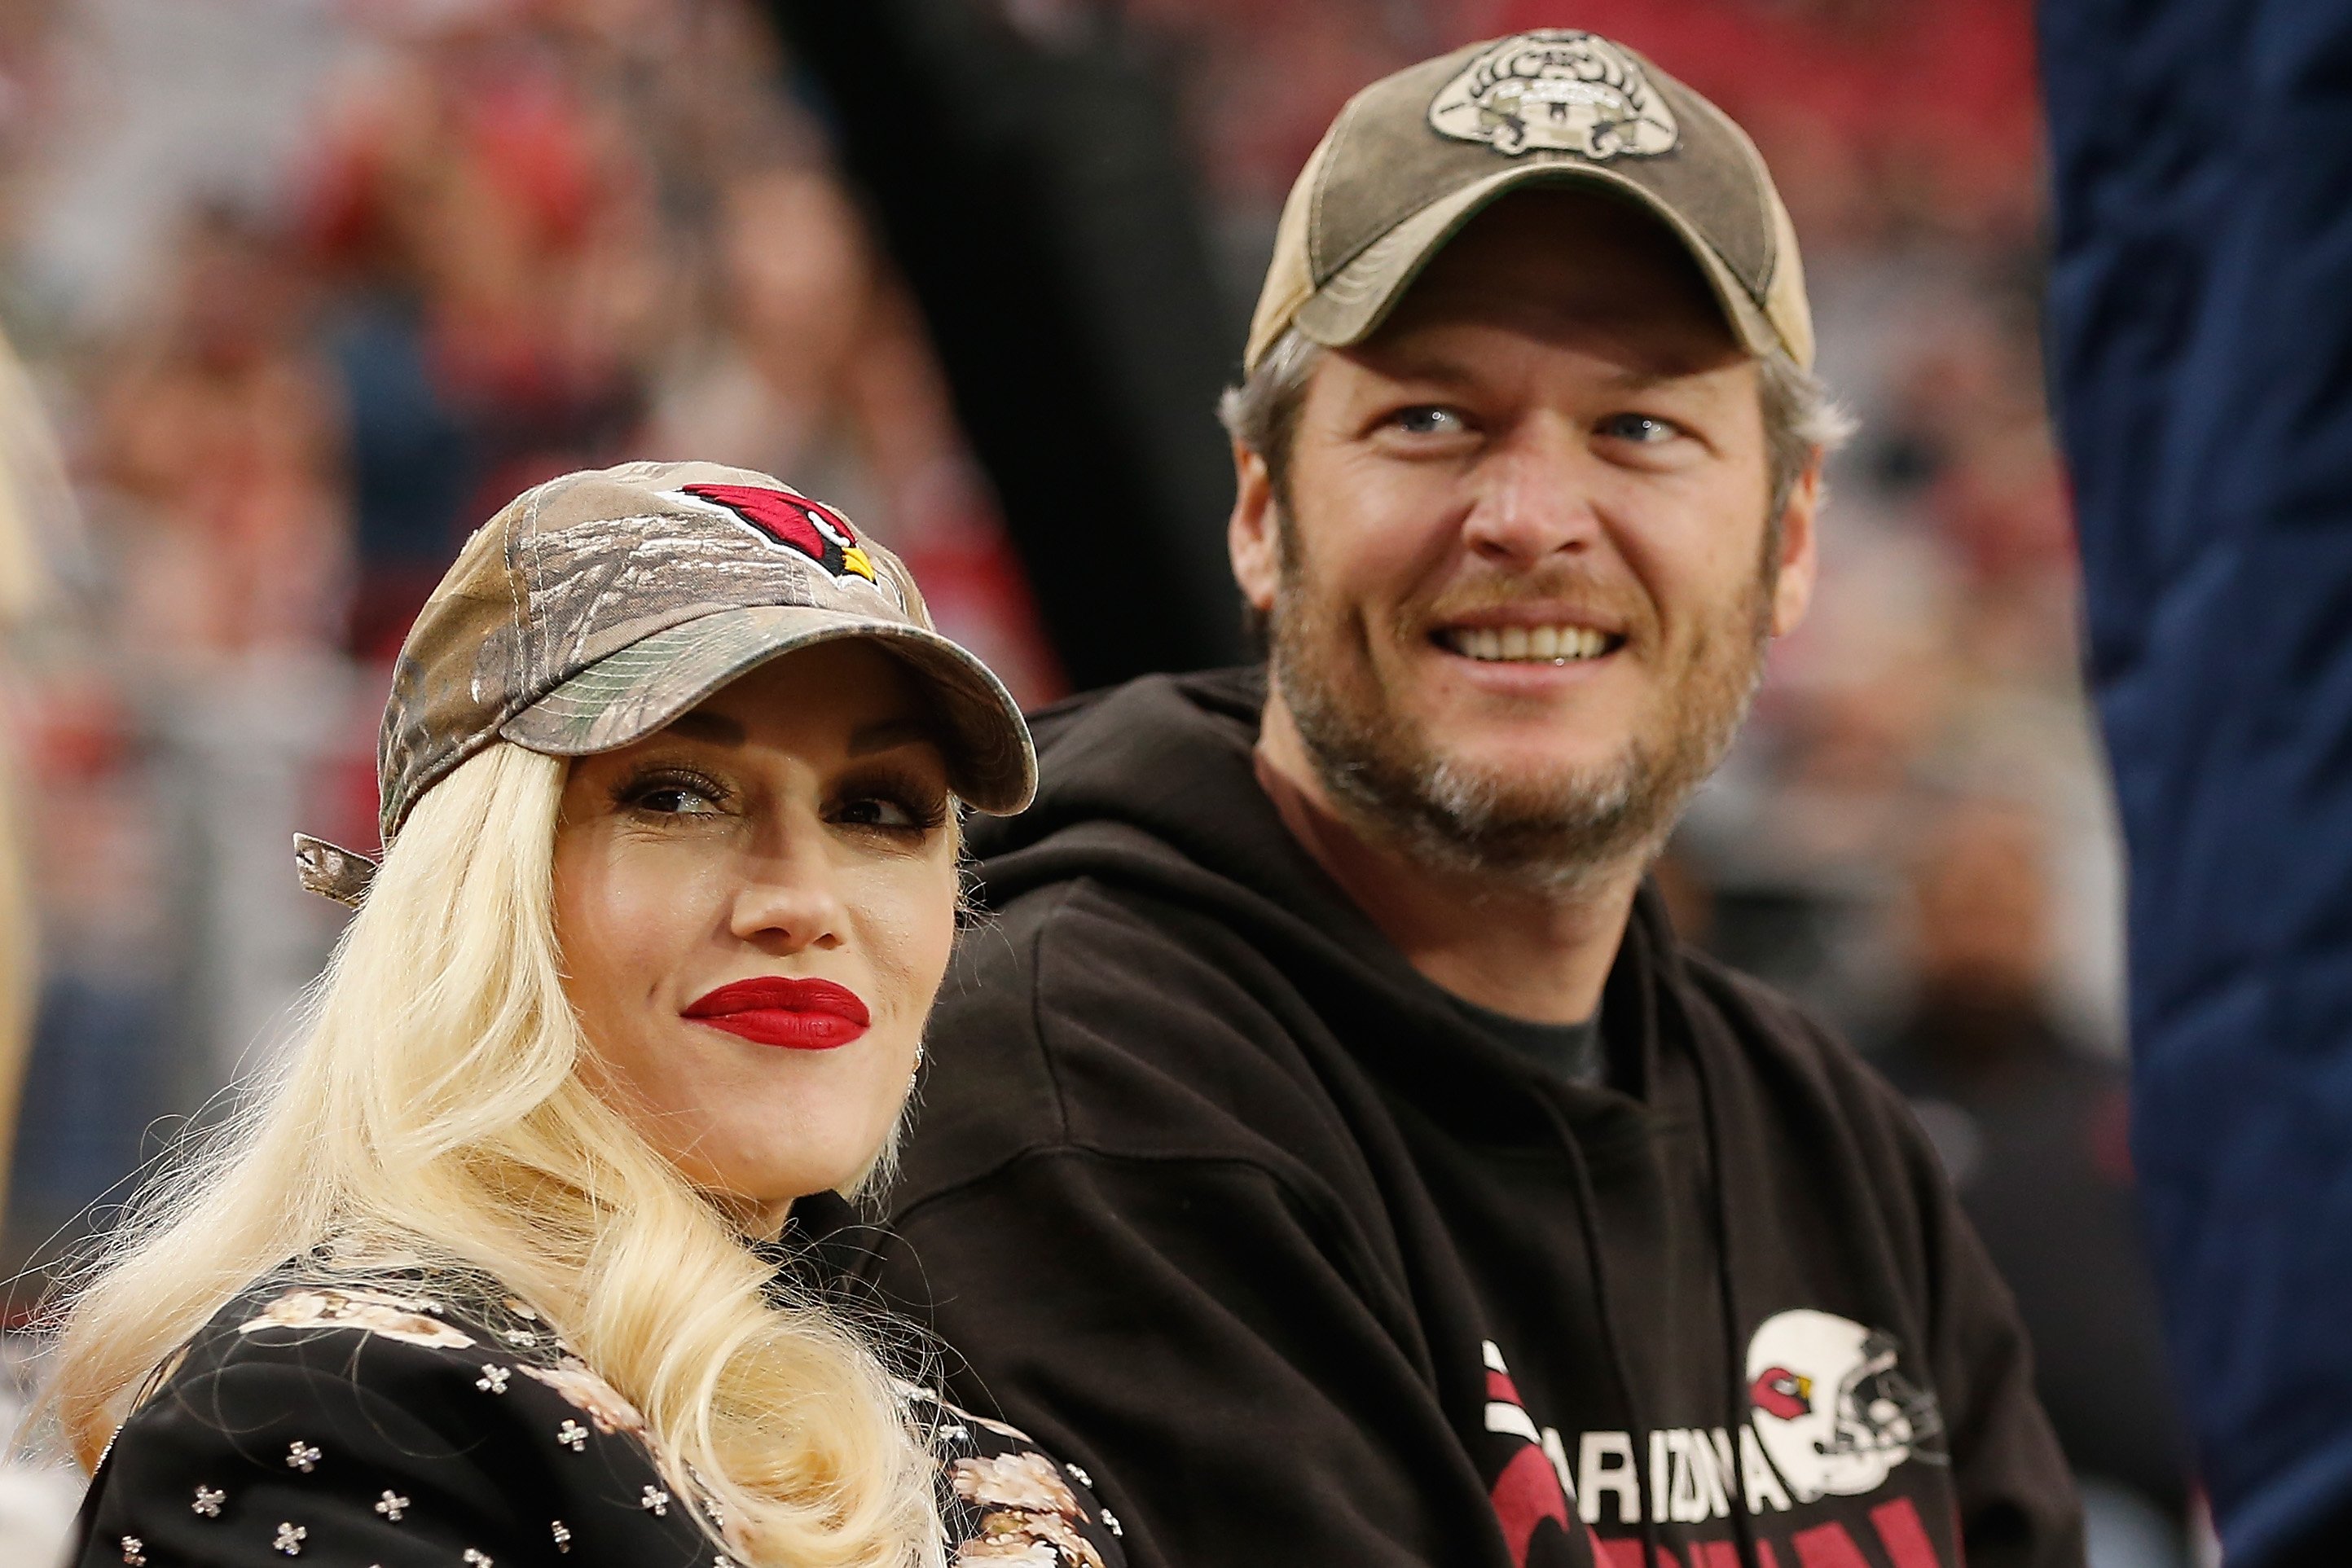 Gwen Stefani and Blake Shelton attend the NFL game between the Green Bay Packers and Arizona Cardinals. | Source: Getty Images